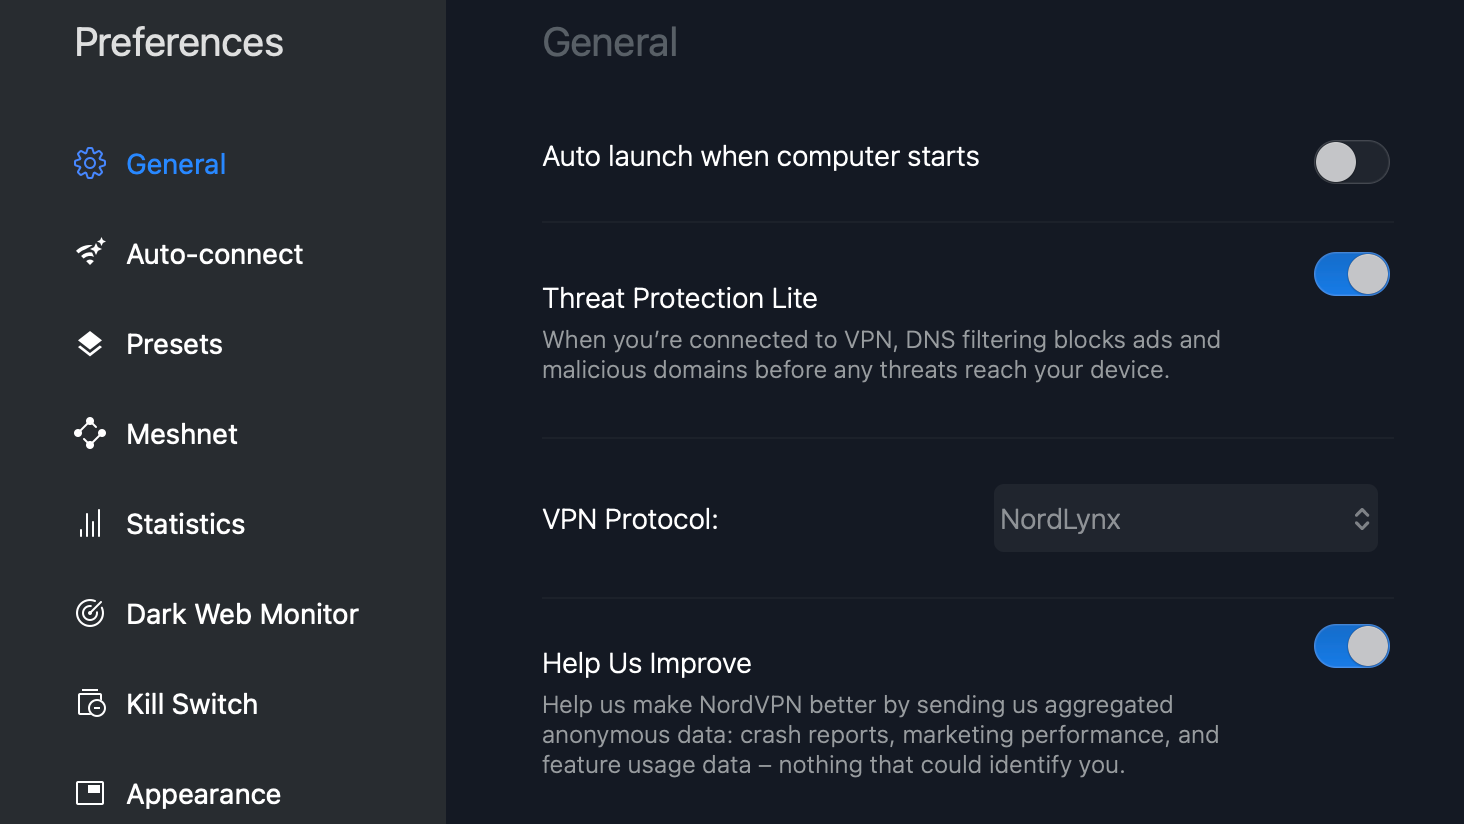 NordVPN comes with Threat Protection Lite built in.